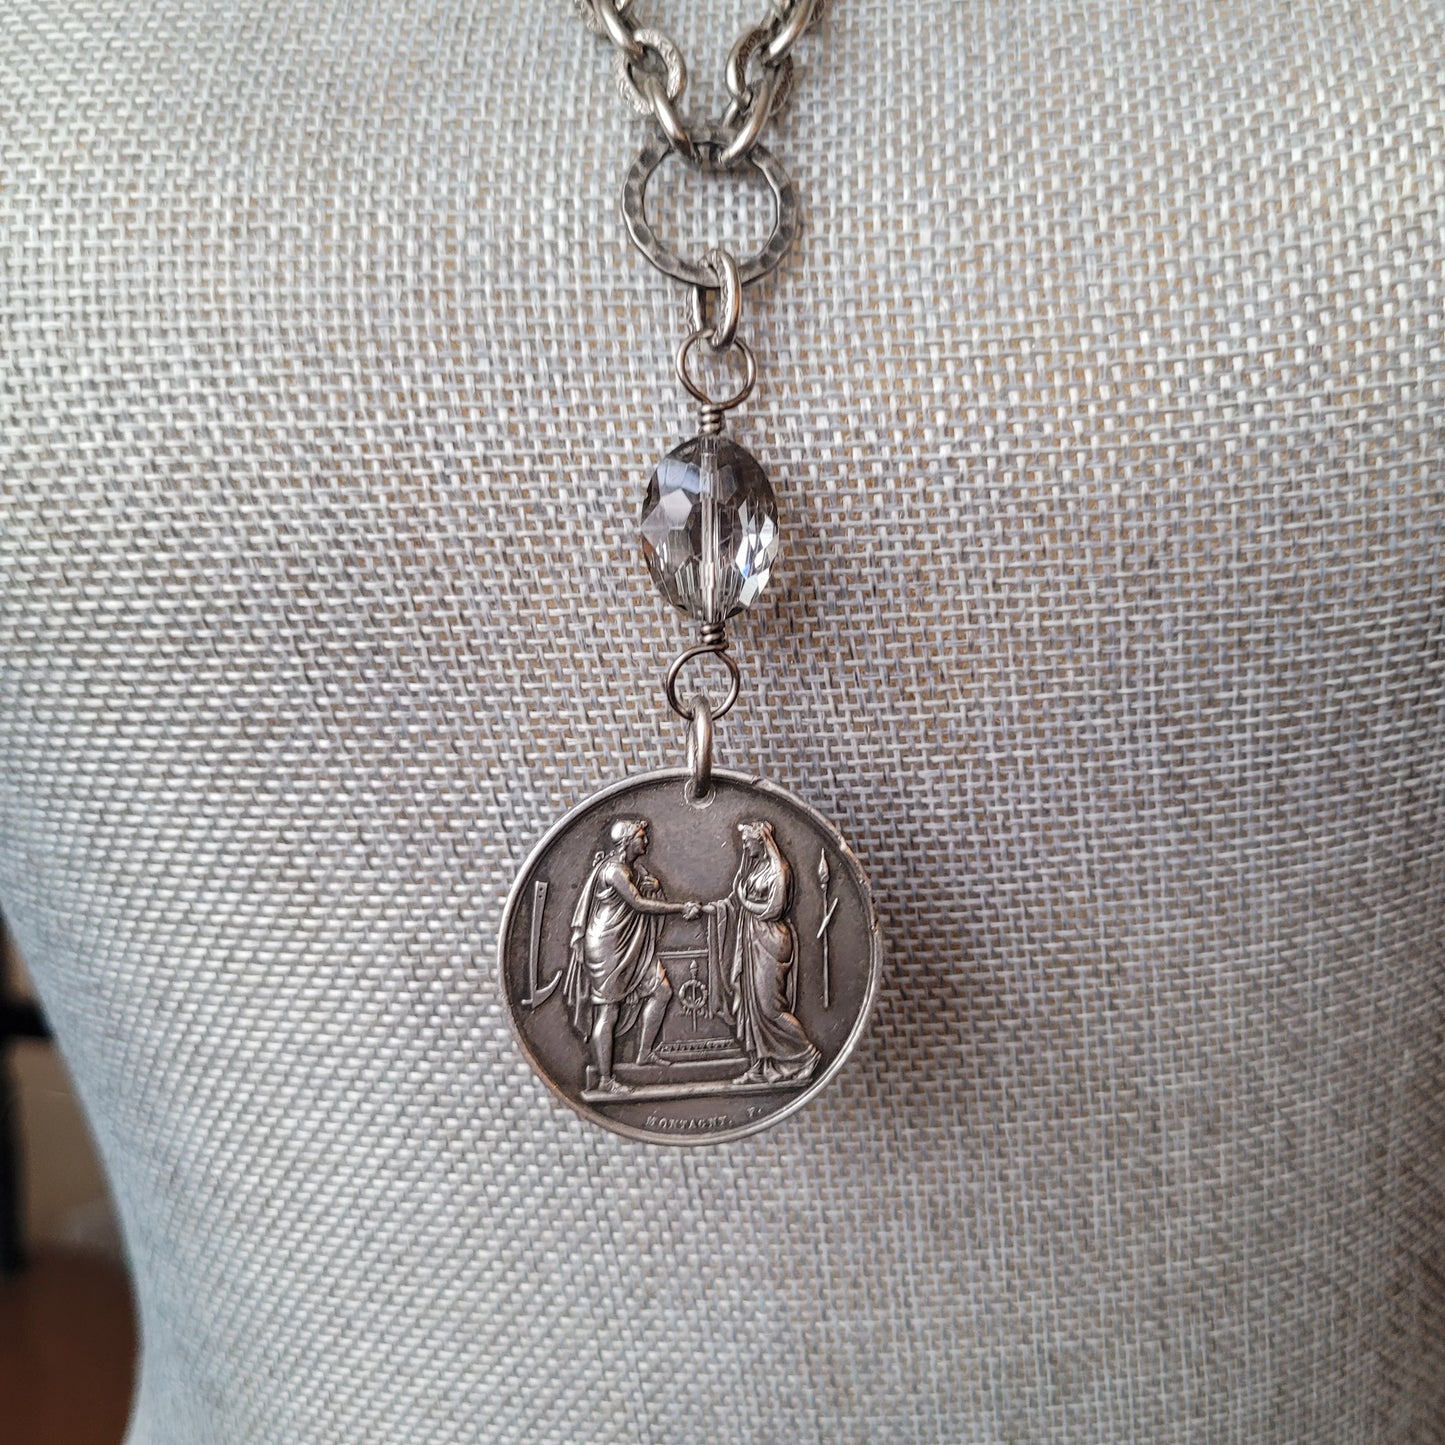 Man and Wife, Vintage French Civil Marriage medallion necklace